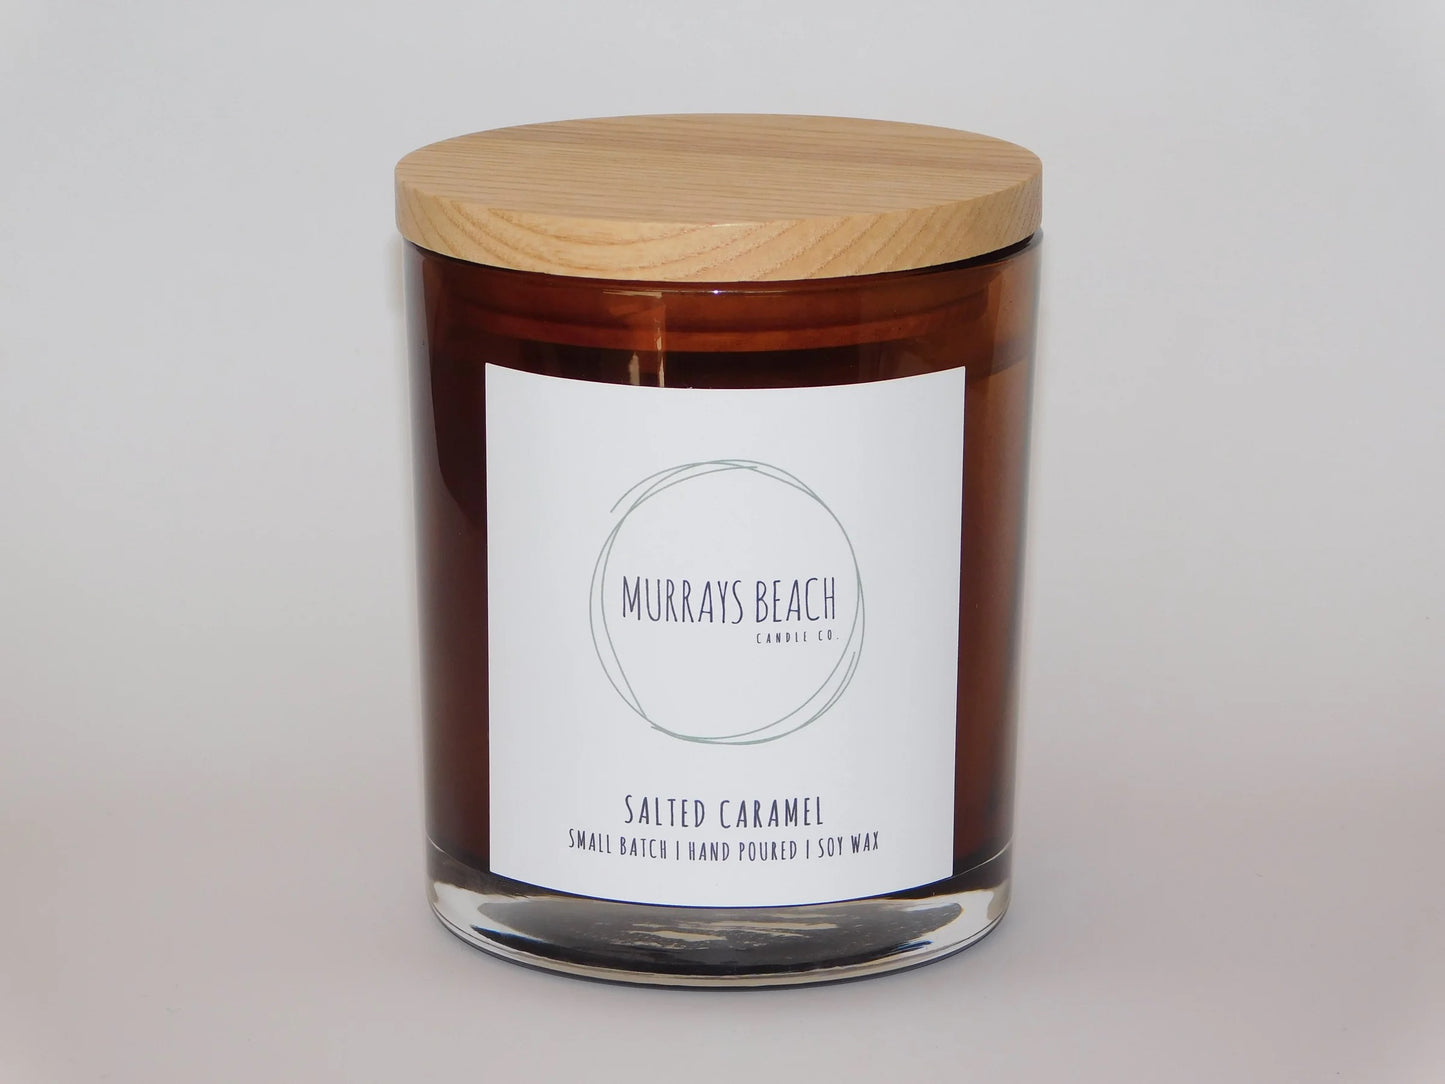 murrays beach candle co. in a glass jar with cover (salted caramel)